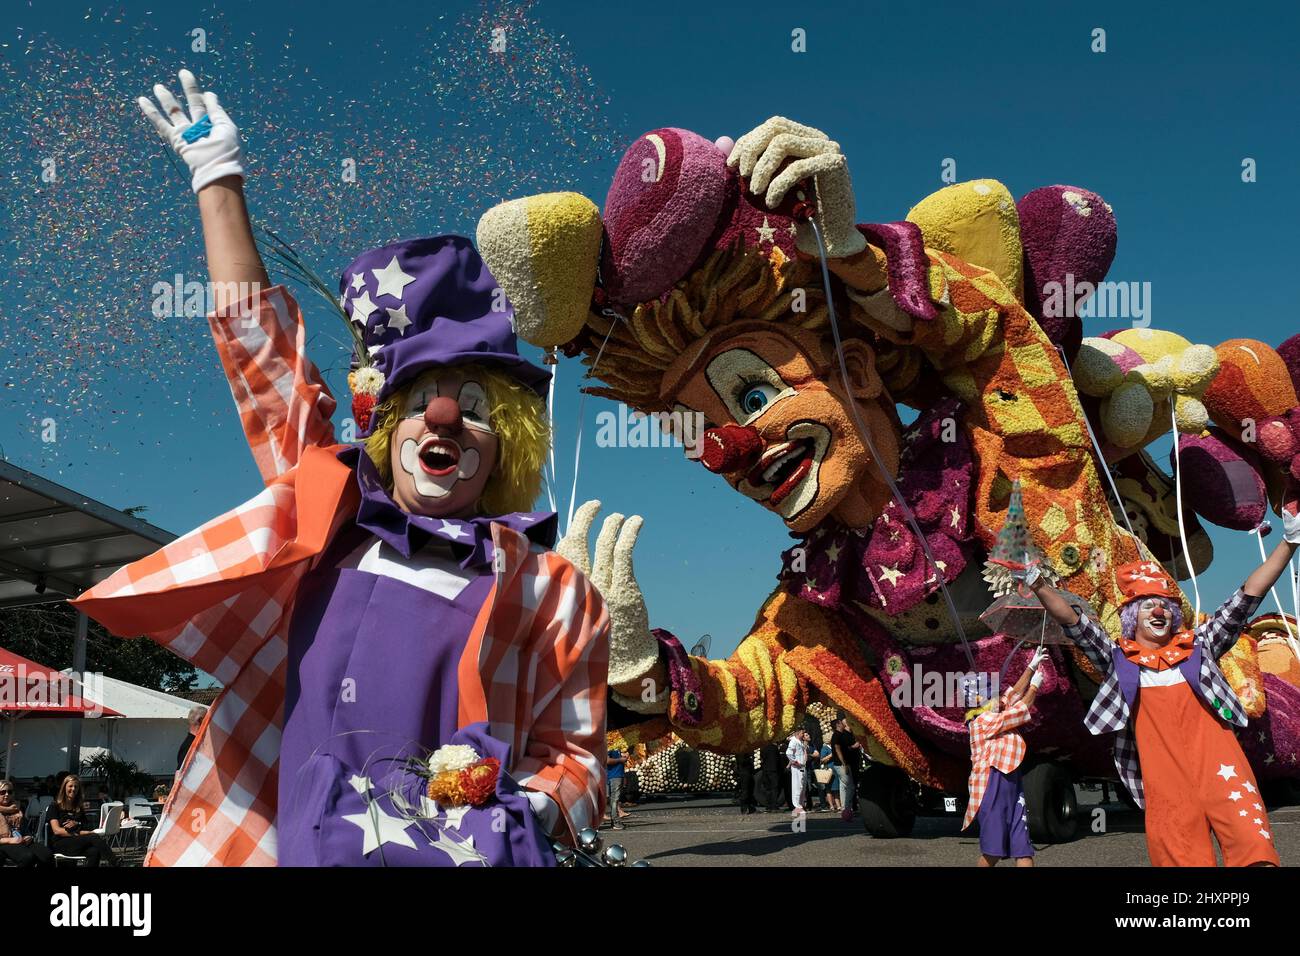 The float Clowning around during the parade in Zundert Stock Photo